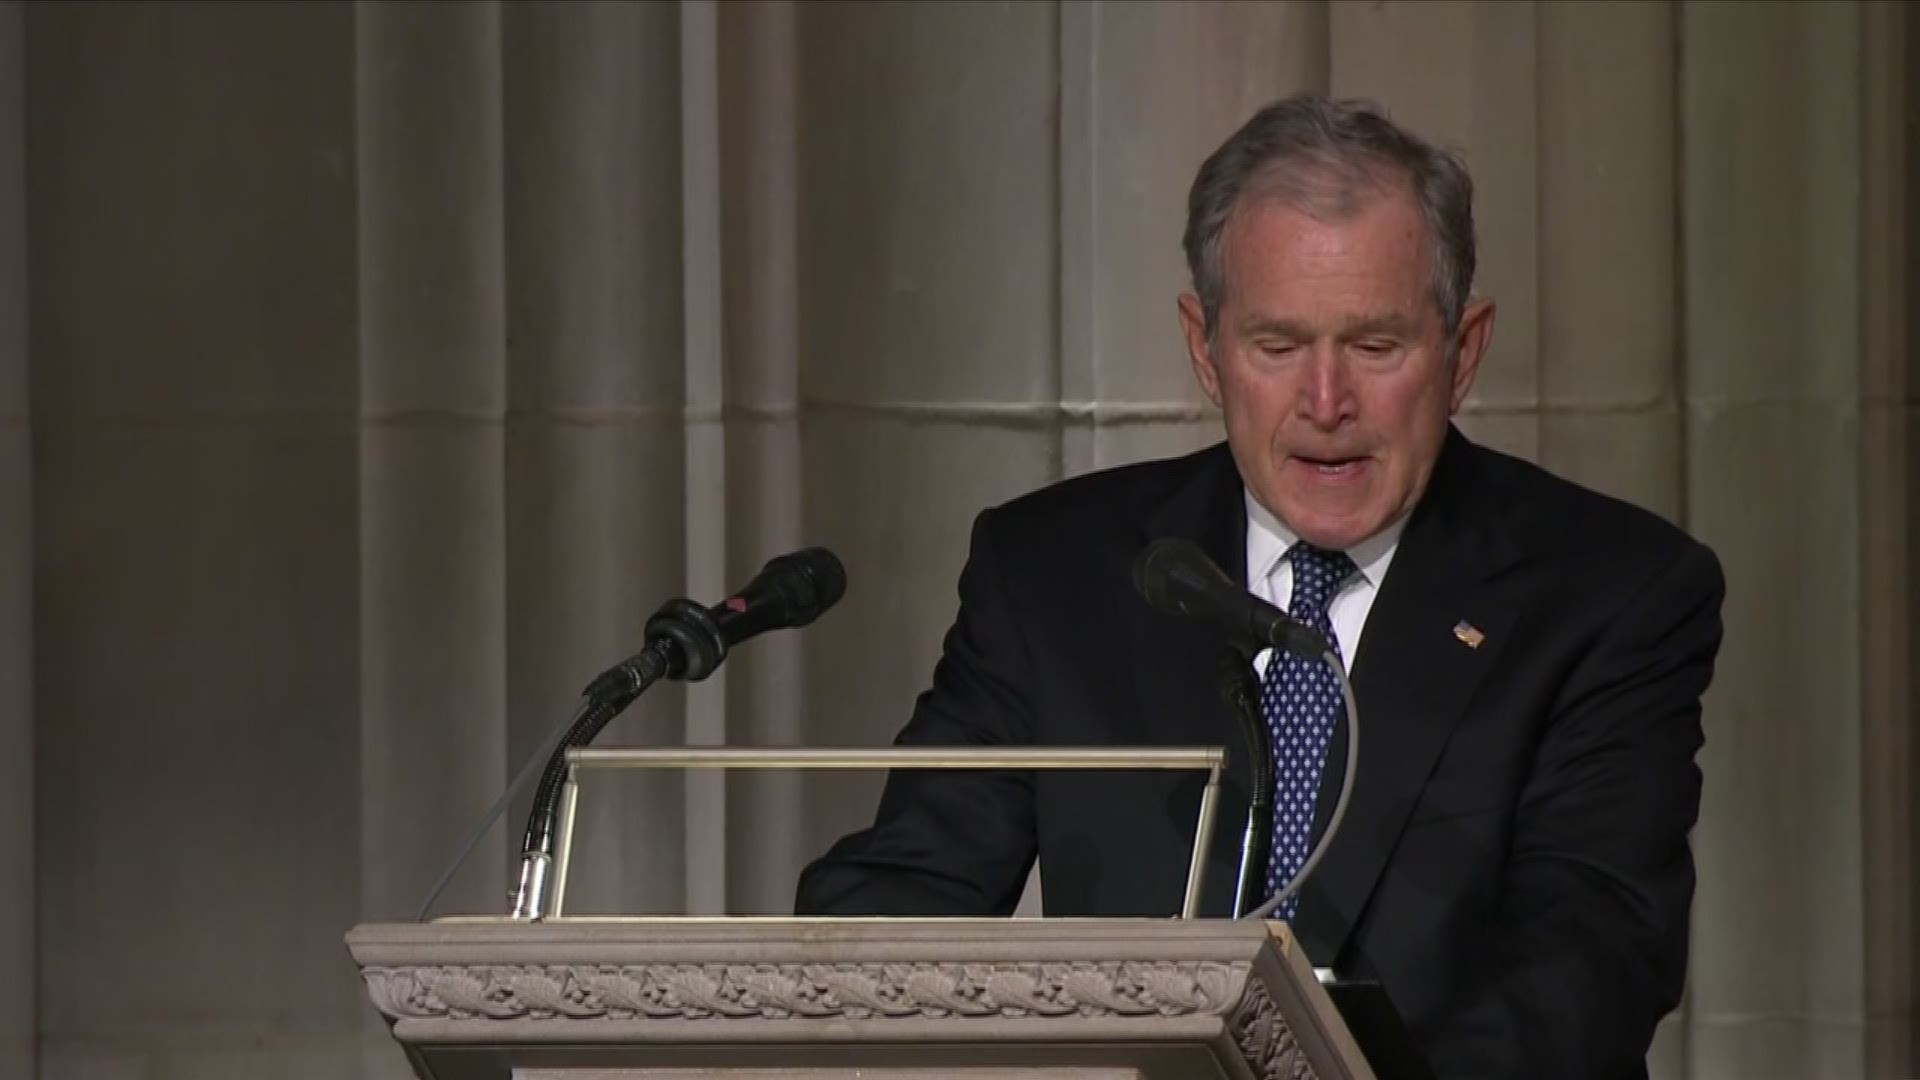 Former President George W. Bush presented an emotional eulogy for his father at the Washington National Cathedral.